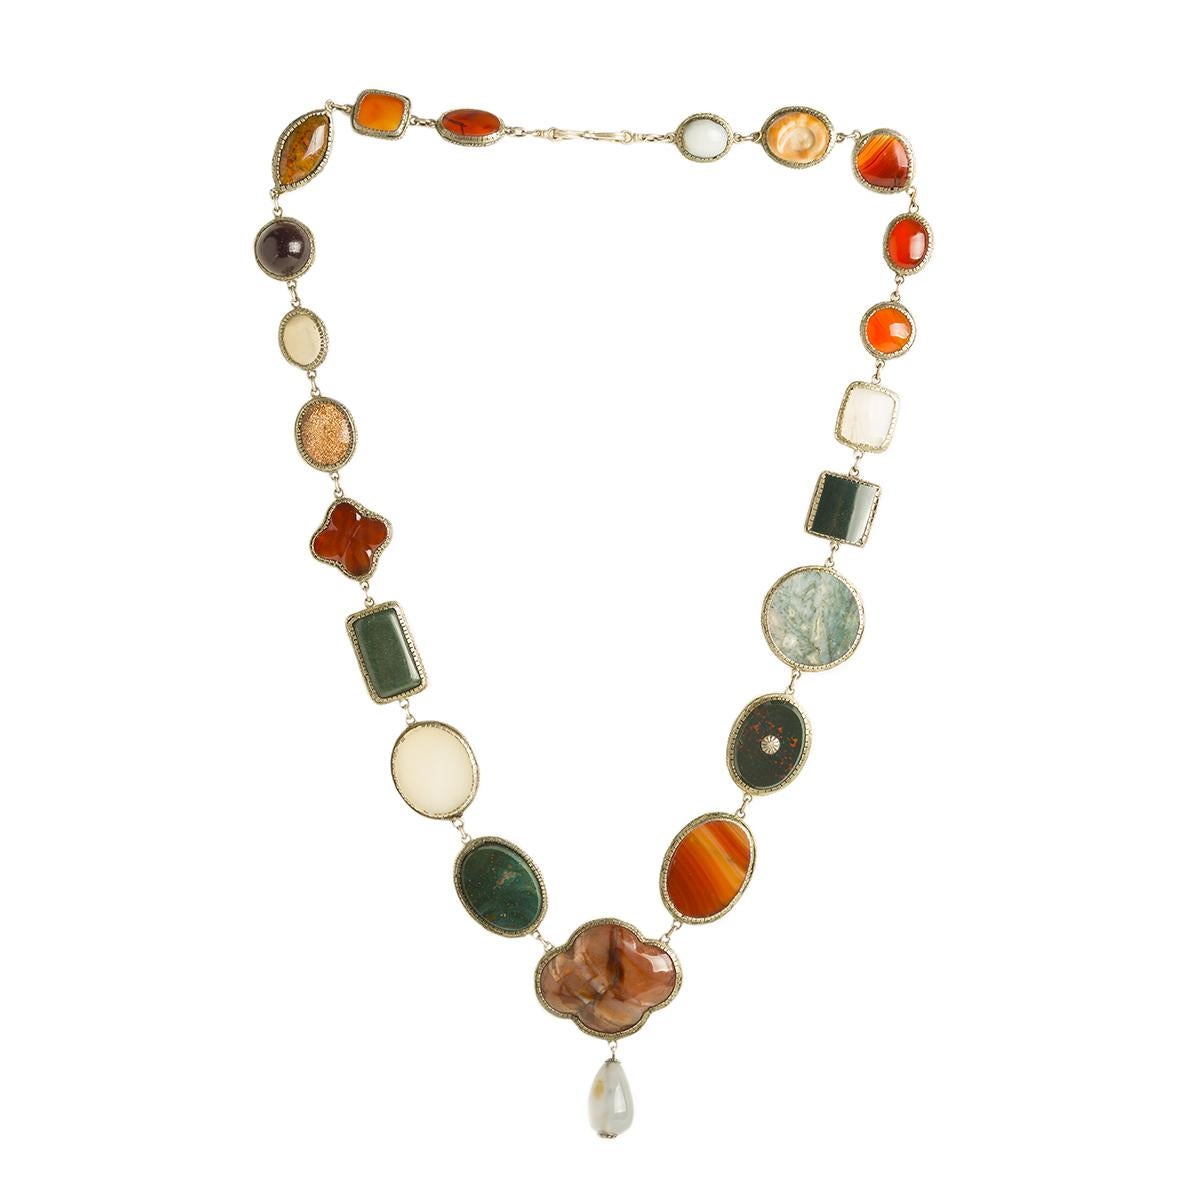 1820s 925 Silver Necklace with Agate and Semiprecious Stones In Excellent Condition For Sale In roma, IT